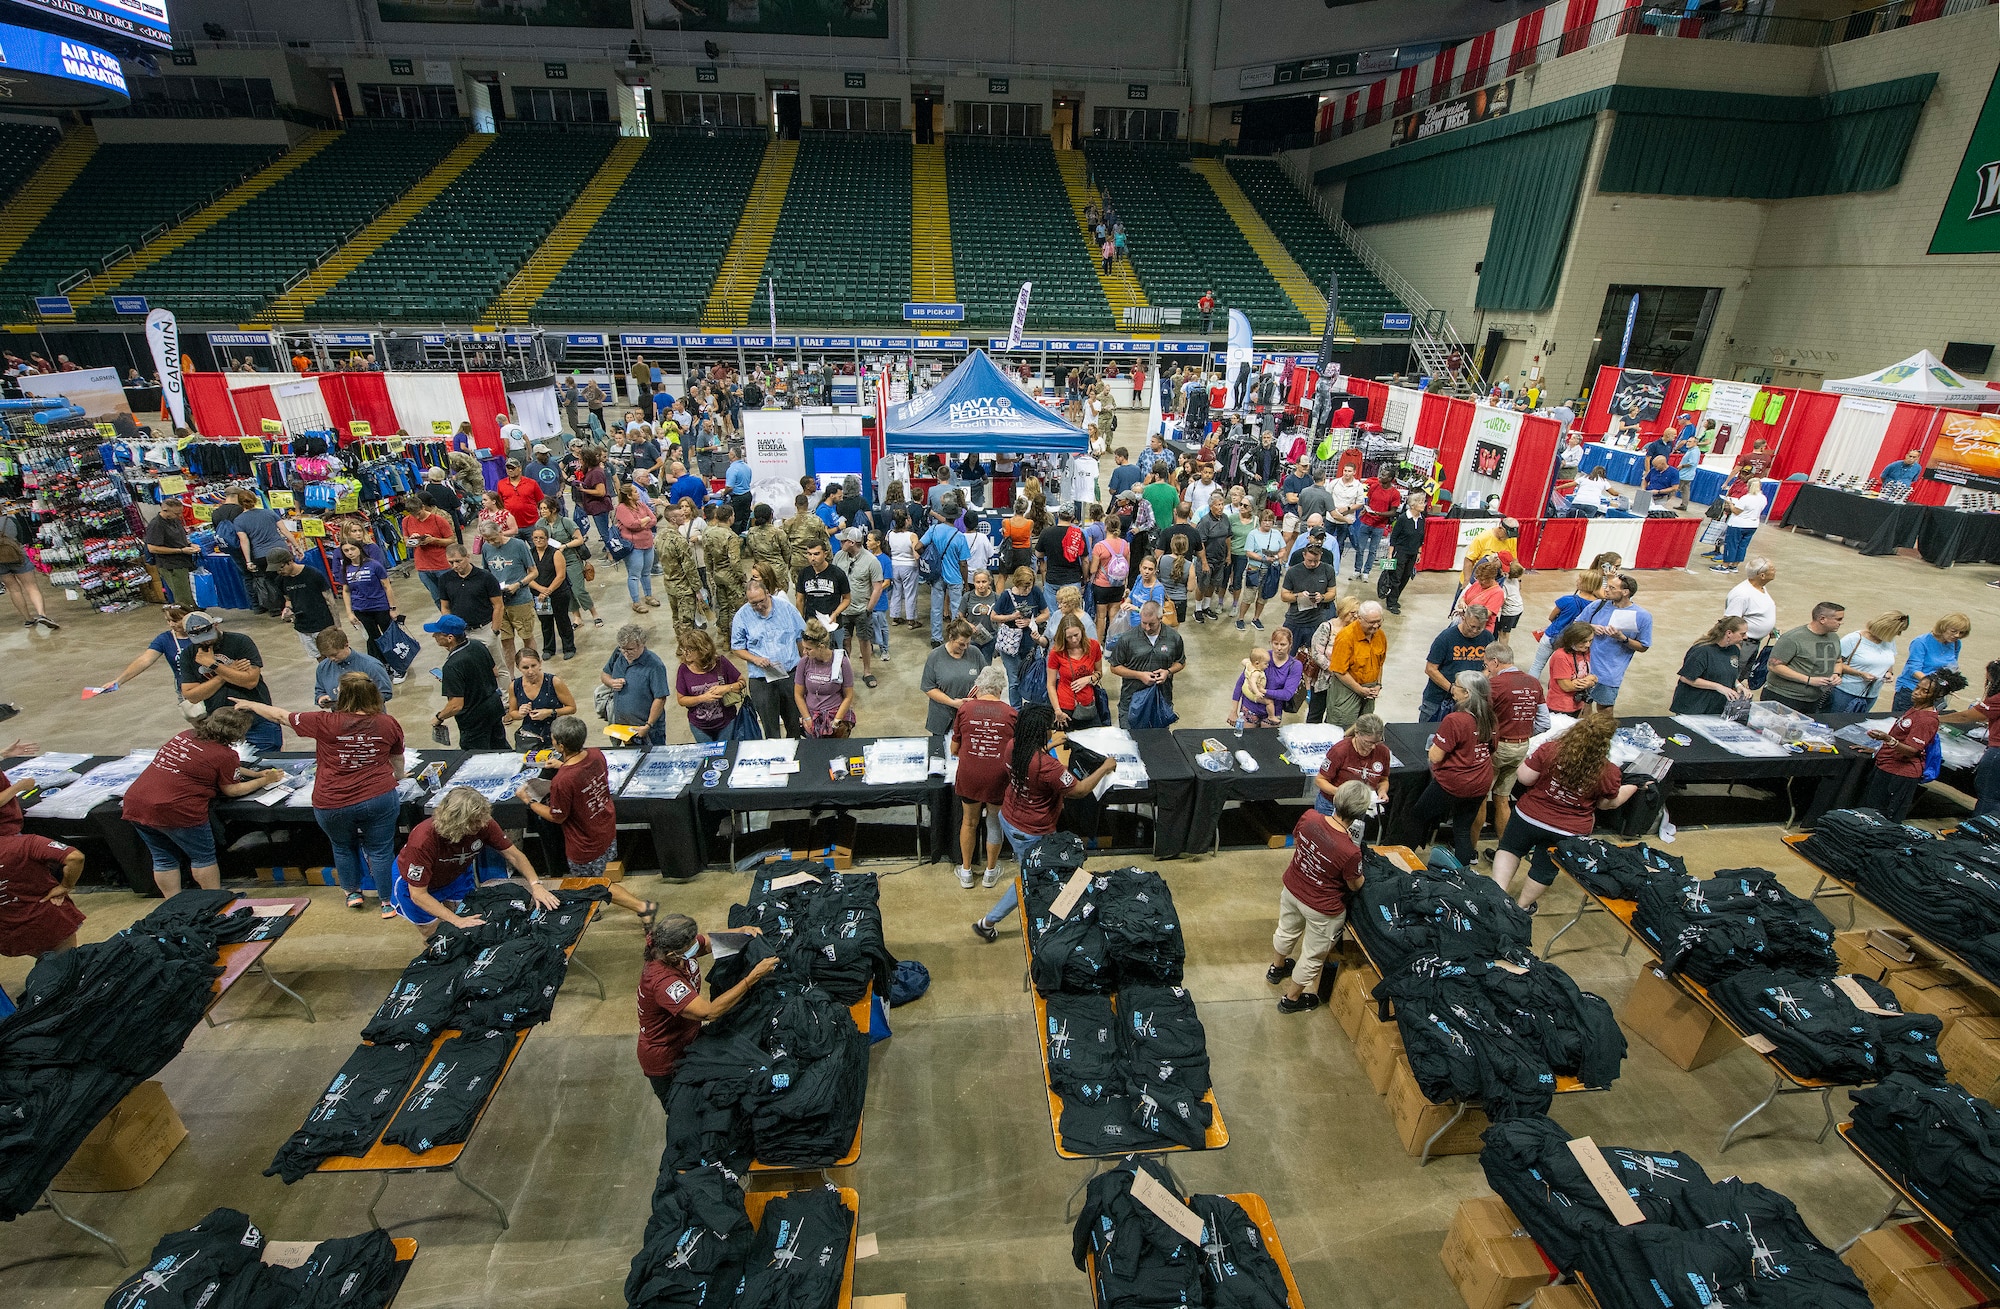 Air Force Marathon participants collect their race bibs and T-shirts during the Health & Fitness Expo on Sept. 15, 2022, at Wright State University’s Nutter Center, Fairborn, Ohio. The Expo featured about 75 exhibitors specializing in the latest developments in health, fitness and nutrition. Yoga and a mobility clinic were also offered. (U.S. Air Force photo by R.J. Oriez)